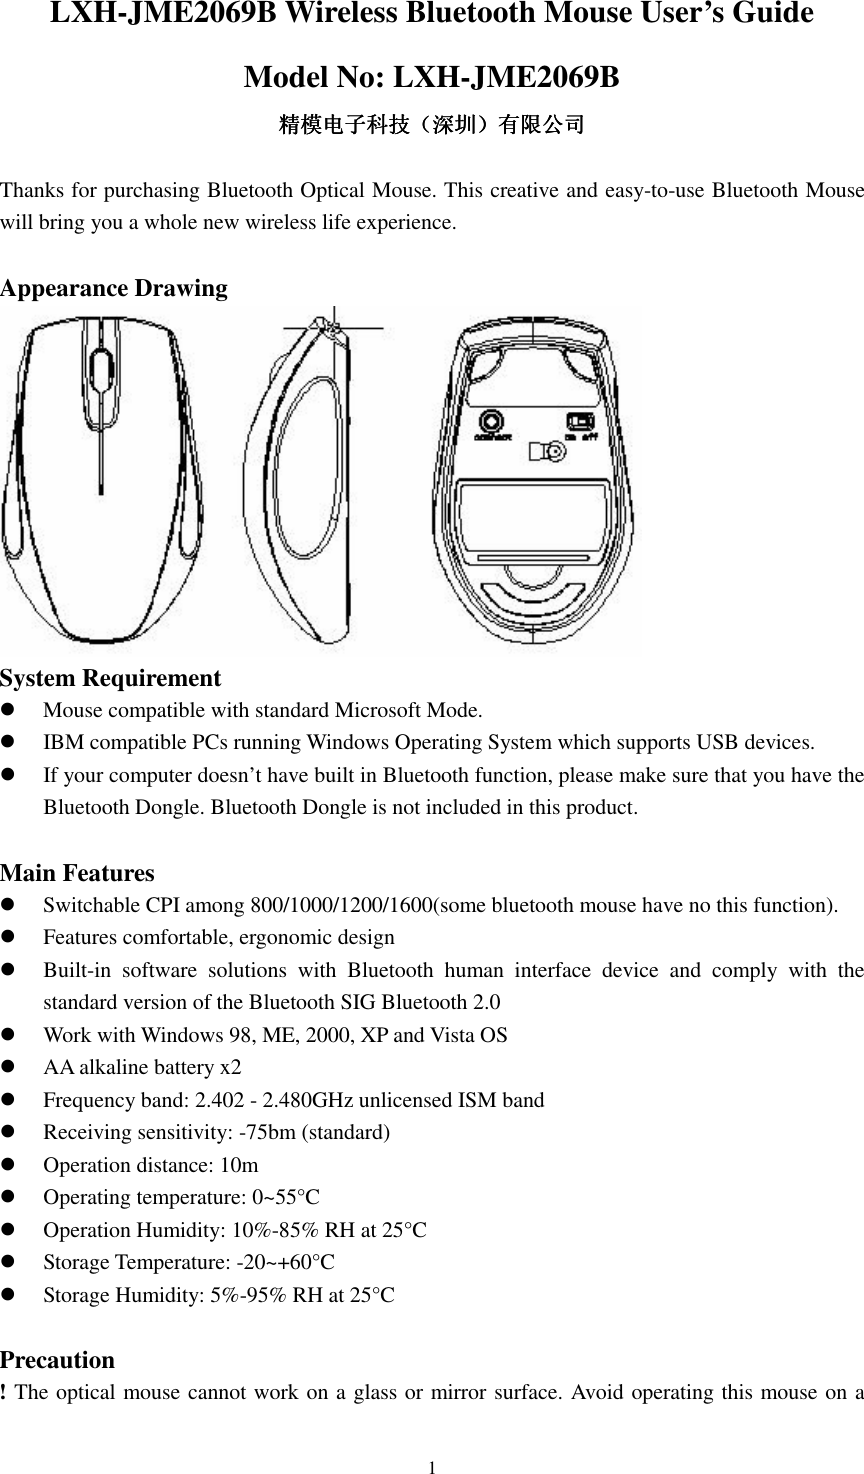  1LXH-JME2069B Wireless Bluetooth Mouse User’s Guide Model No: LXH-JME2069B 精模电子科技精模电子科技精模电子科技精模电子科技（（（（深圳深圳深圳深圳））））有限公司有限公司有限公司有限公司  Thanks for purchasing Bluetooth Optical Mouse. This creative and easy-to-use Bluetooth Mouse will bring you a whole new wireless life experience.  Appearance Drawing  System Requirement  Mouse compatible with standard Microsoft Mode.  IBM compatible PCs running Windows Operating System which supports USB devices.  If your computer doesn’t have built in Bluetooth function, please make sure that you have the Bluetooth Dongle. Bluetooth Dongle is not included in this product.  Main Features  Switchable CPI among 800/1000/1200/1600(some bluetooth mouse have no this function).  Features comfortable, ergonomic design  Built-in  software  solutions  with  Bluetooth  human  interface  device  and  comply  with  the standard version of the Bluetooth SIG Bluetooth 2.0  Work with Windows 98, ME, 2000, XP and Vista OS  AA alkaline battery x2  Frequency band: 2.402 - 2.480GHz unlicensed ISM band  Receiving sensitivity: -75bm (standard)  Operation distance: 10m  Operating temperature: 0~55°C  Operation Humidity: 10%-85% RH at 25°C  Storage Temperature: -20~+60°C  Storage Humidity: 5%-95% RH at 25°C  Precaution ! The optical mouse cannot work on a glass or mirror surface. Avoid operating this mouse on a 